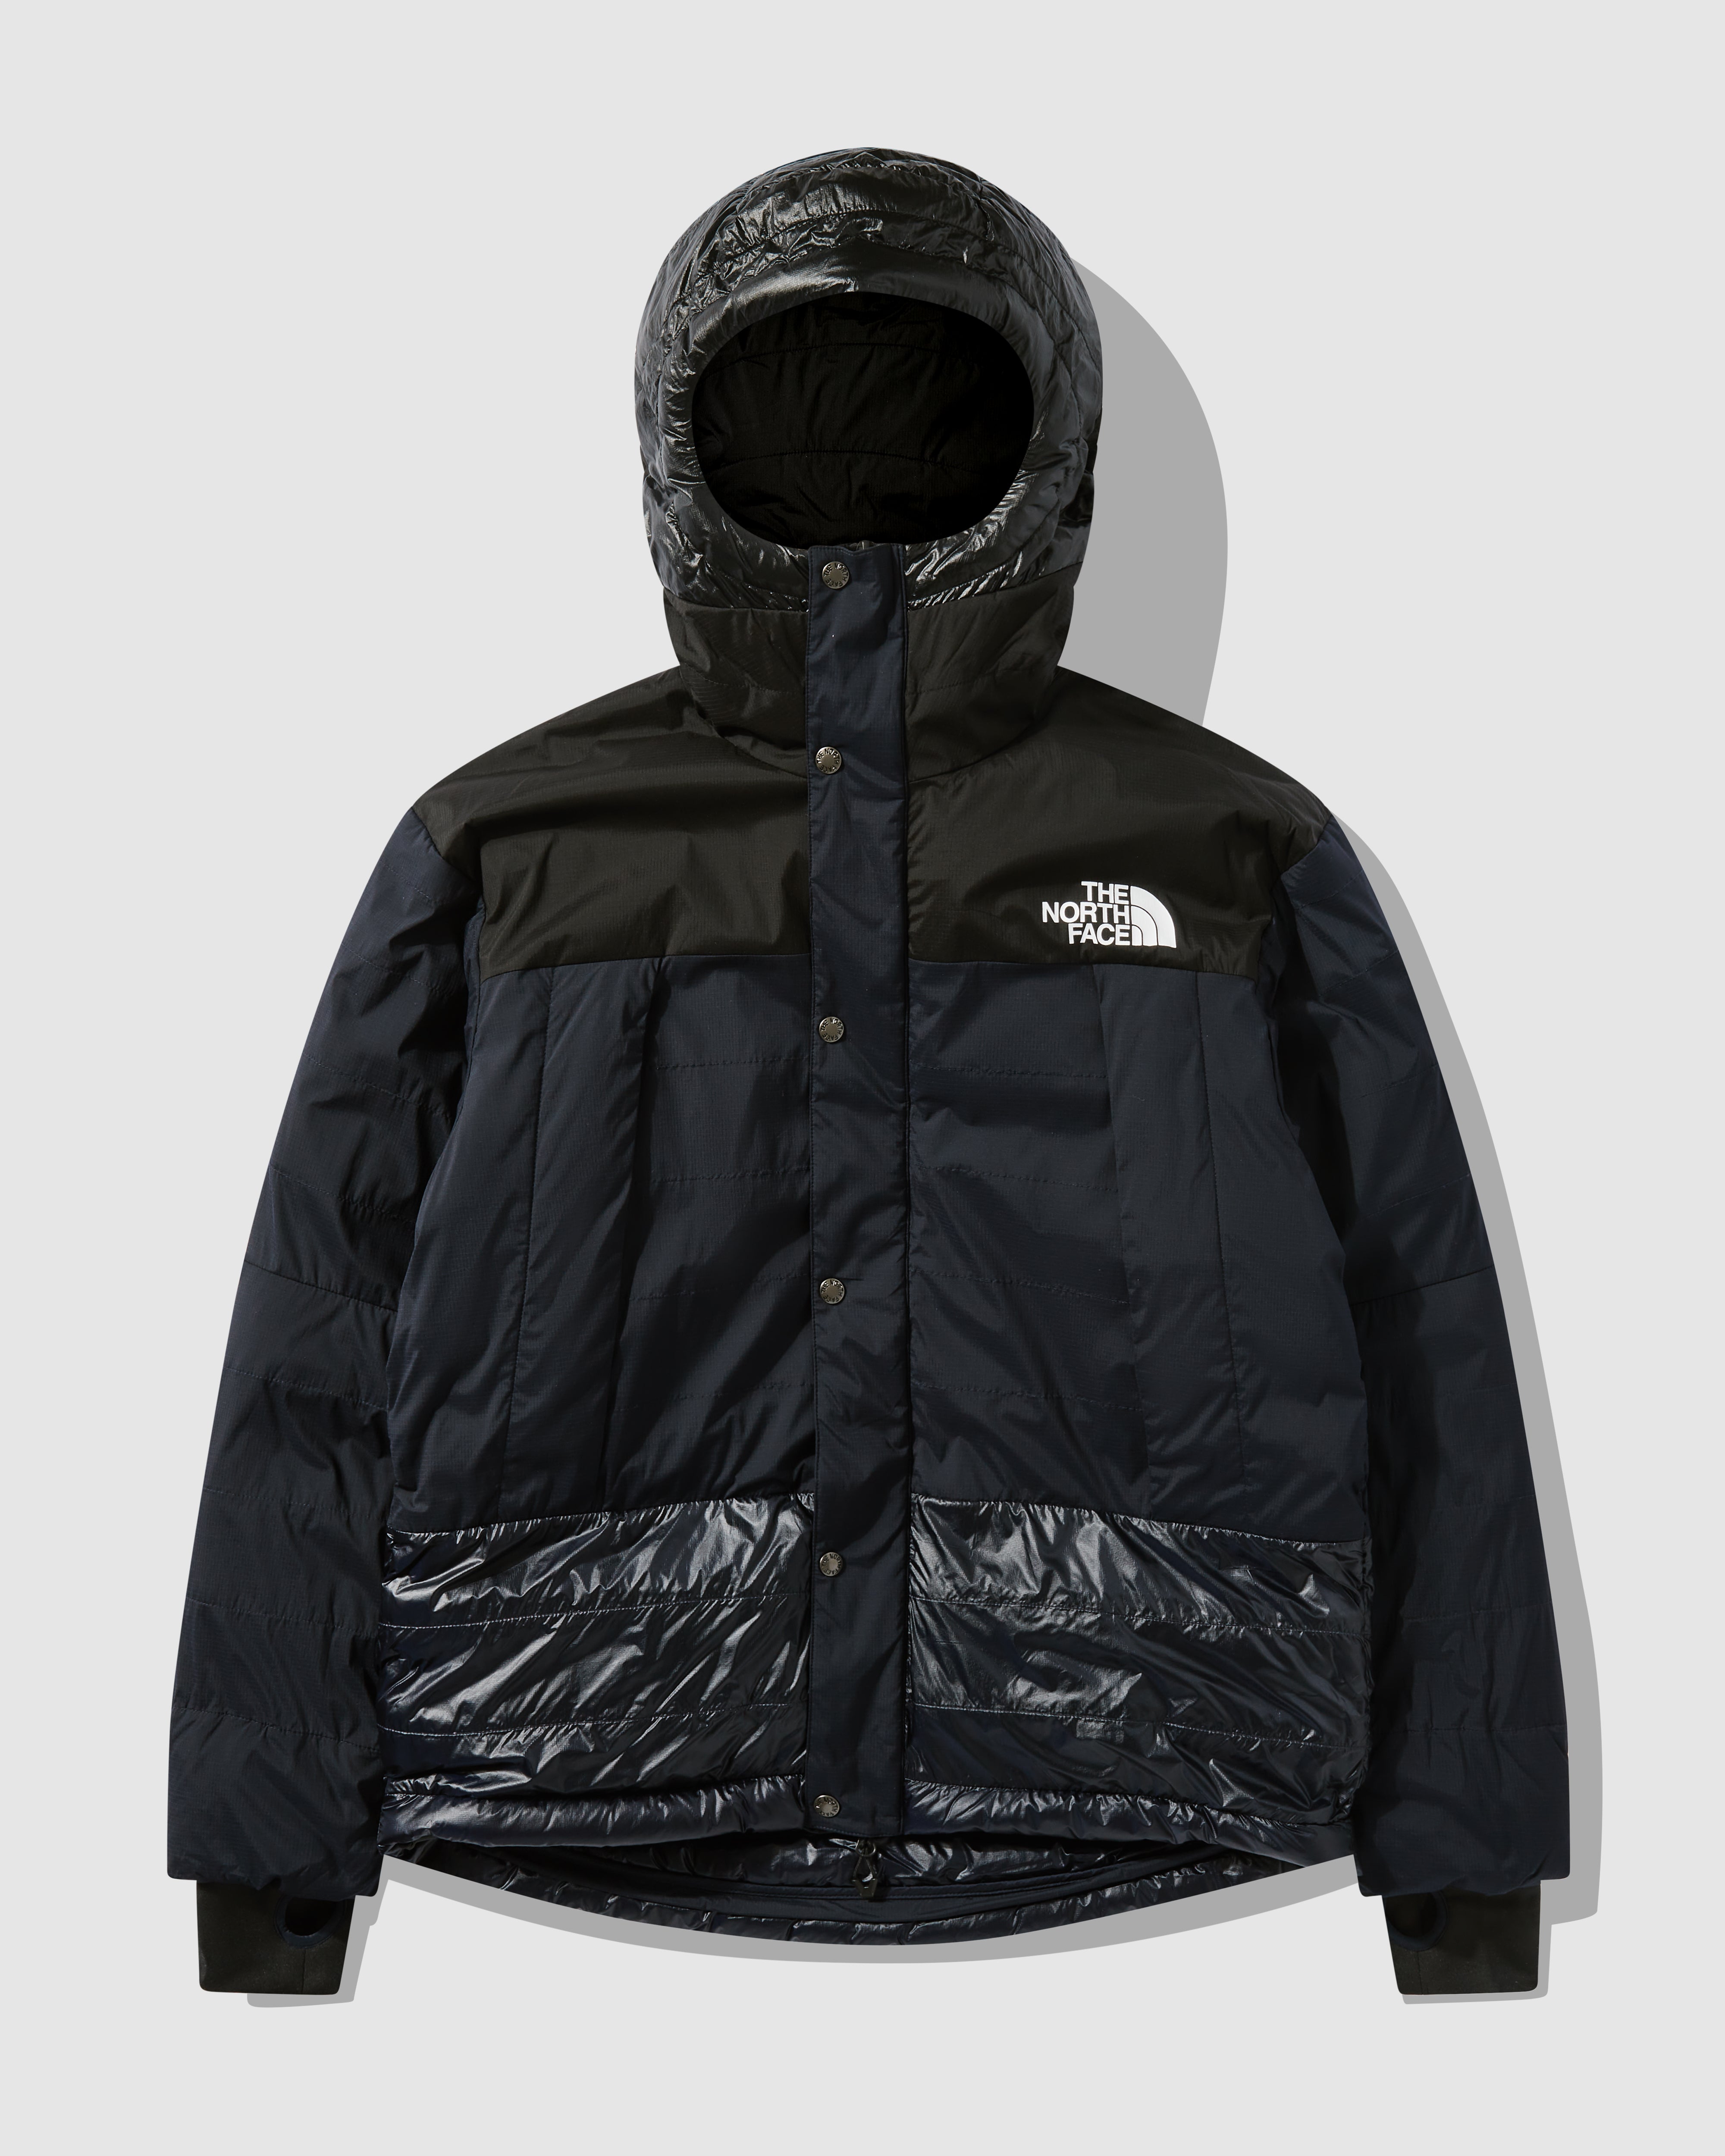 SOUKUU by The North Face X Undercover | DSM London